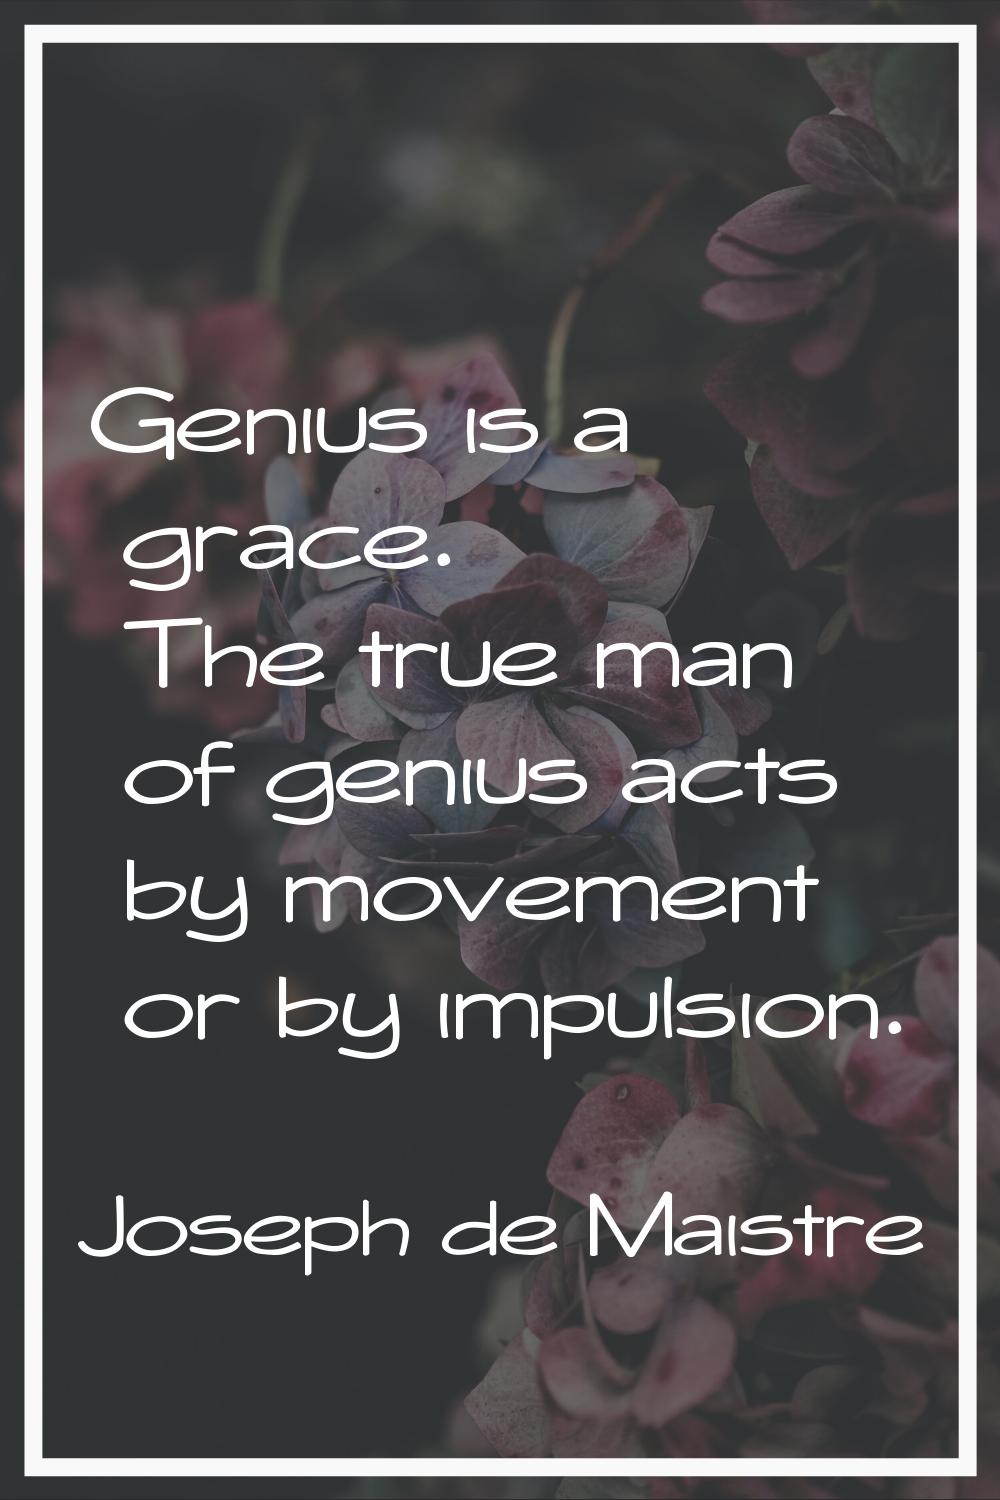 Genius is a grace. The true man of genius acts by movement or by impulsion.